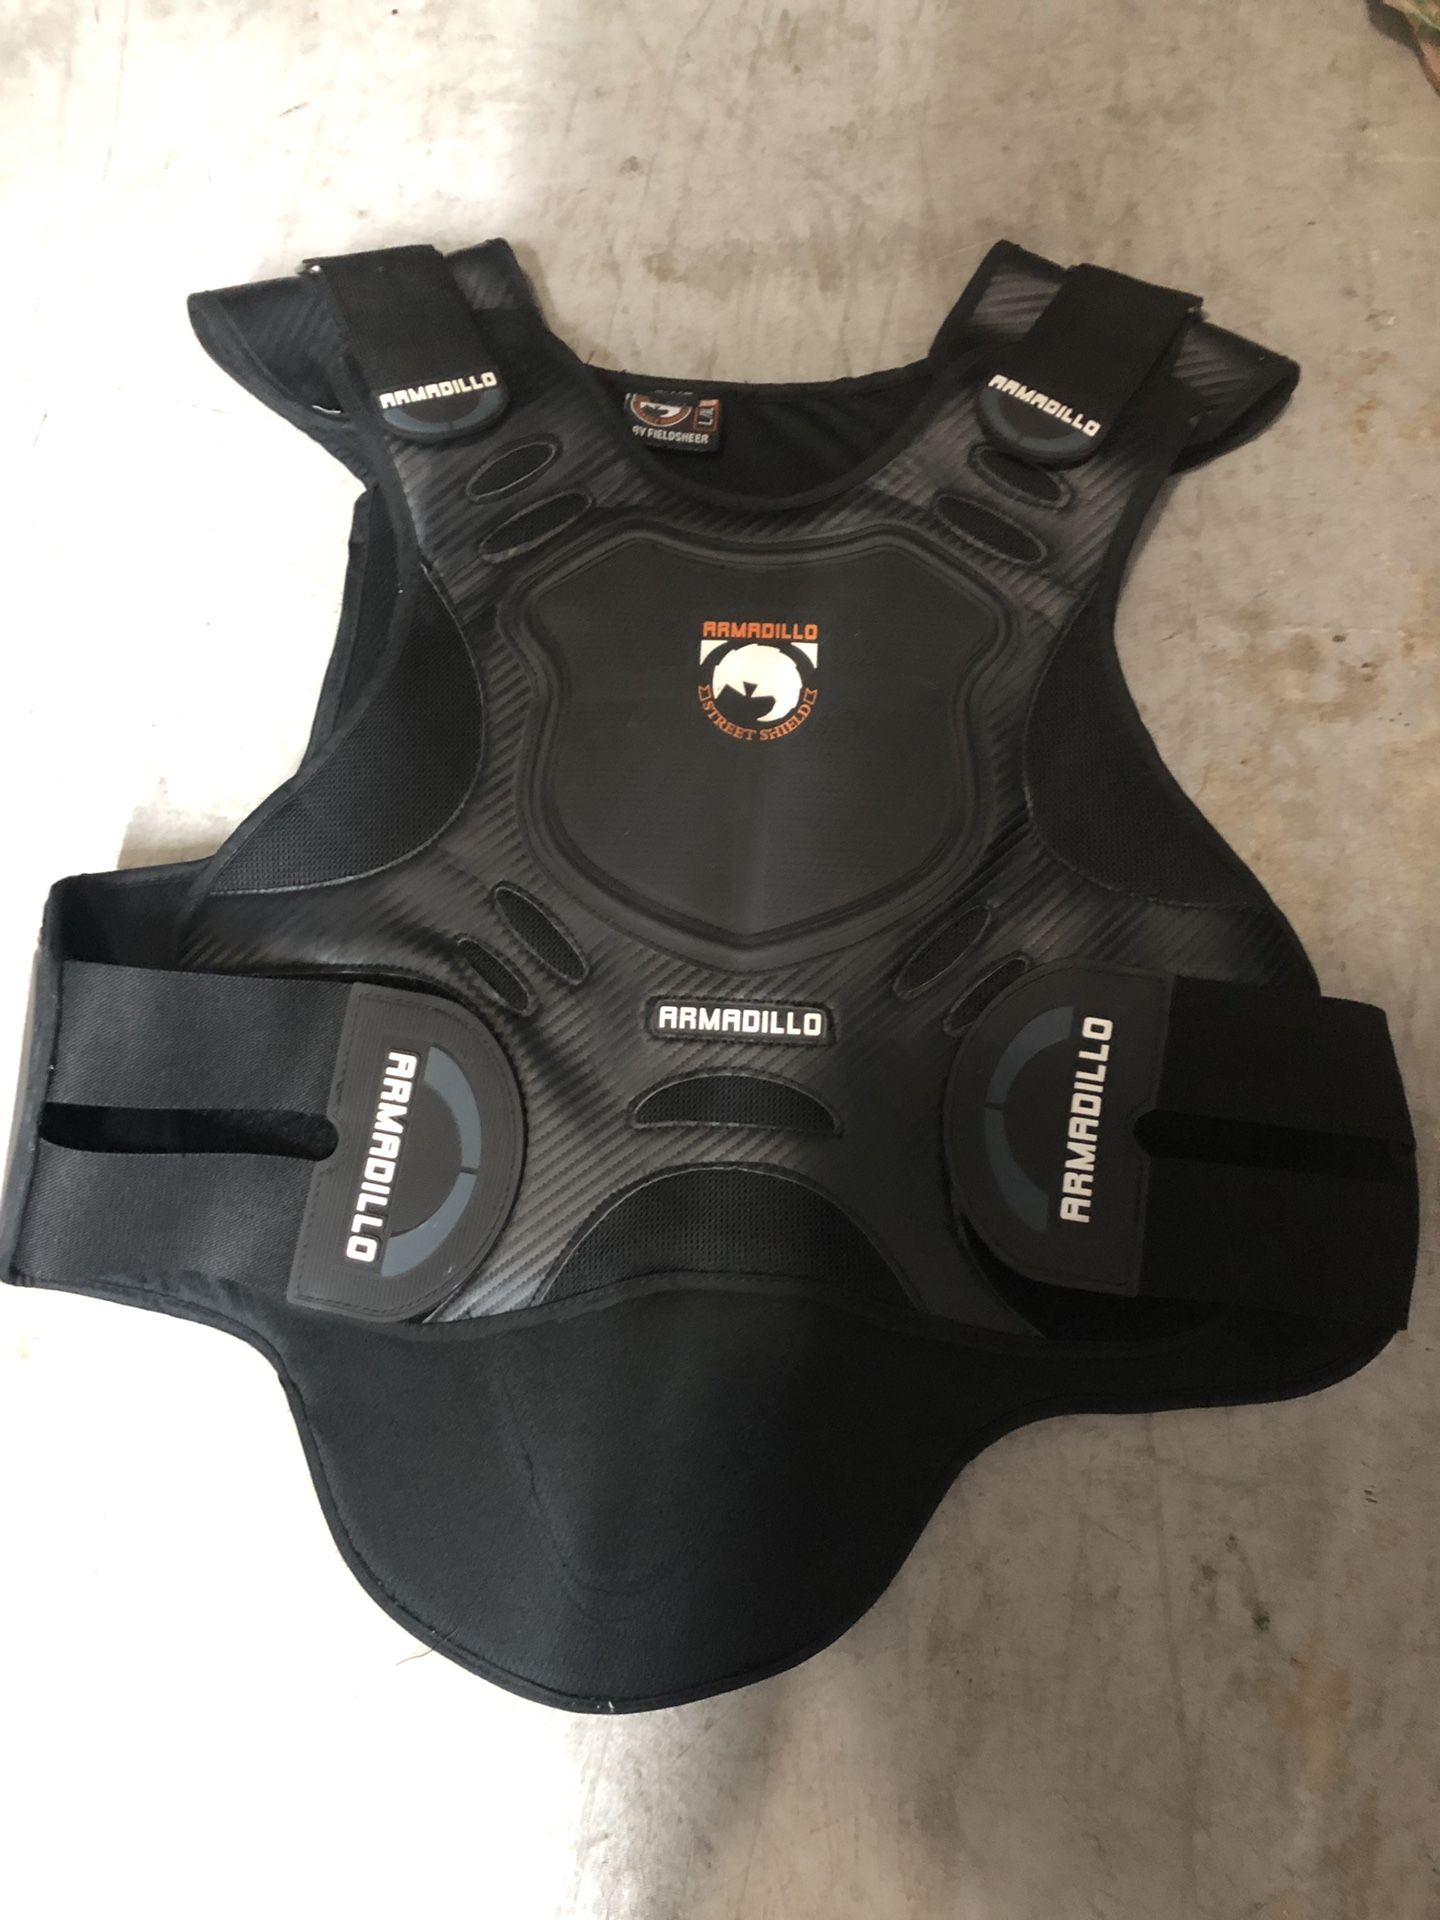 New Motorcycle Vest with chest and back protection (L/XL)